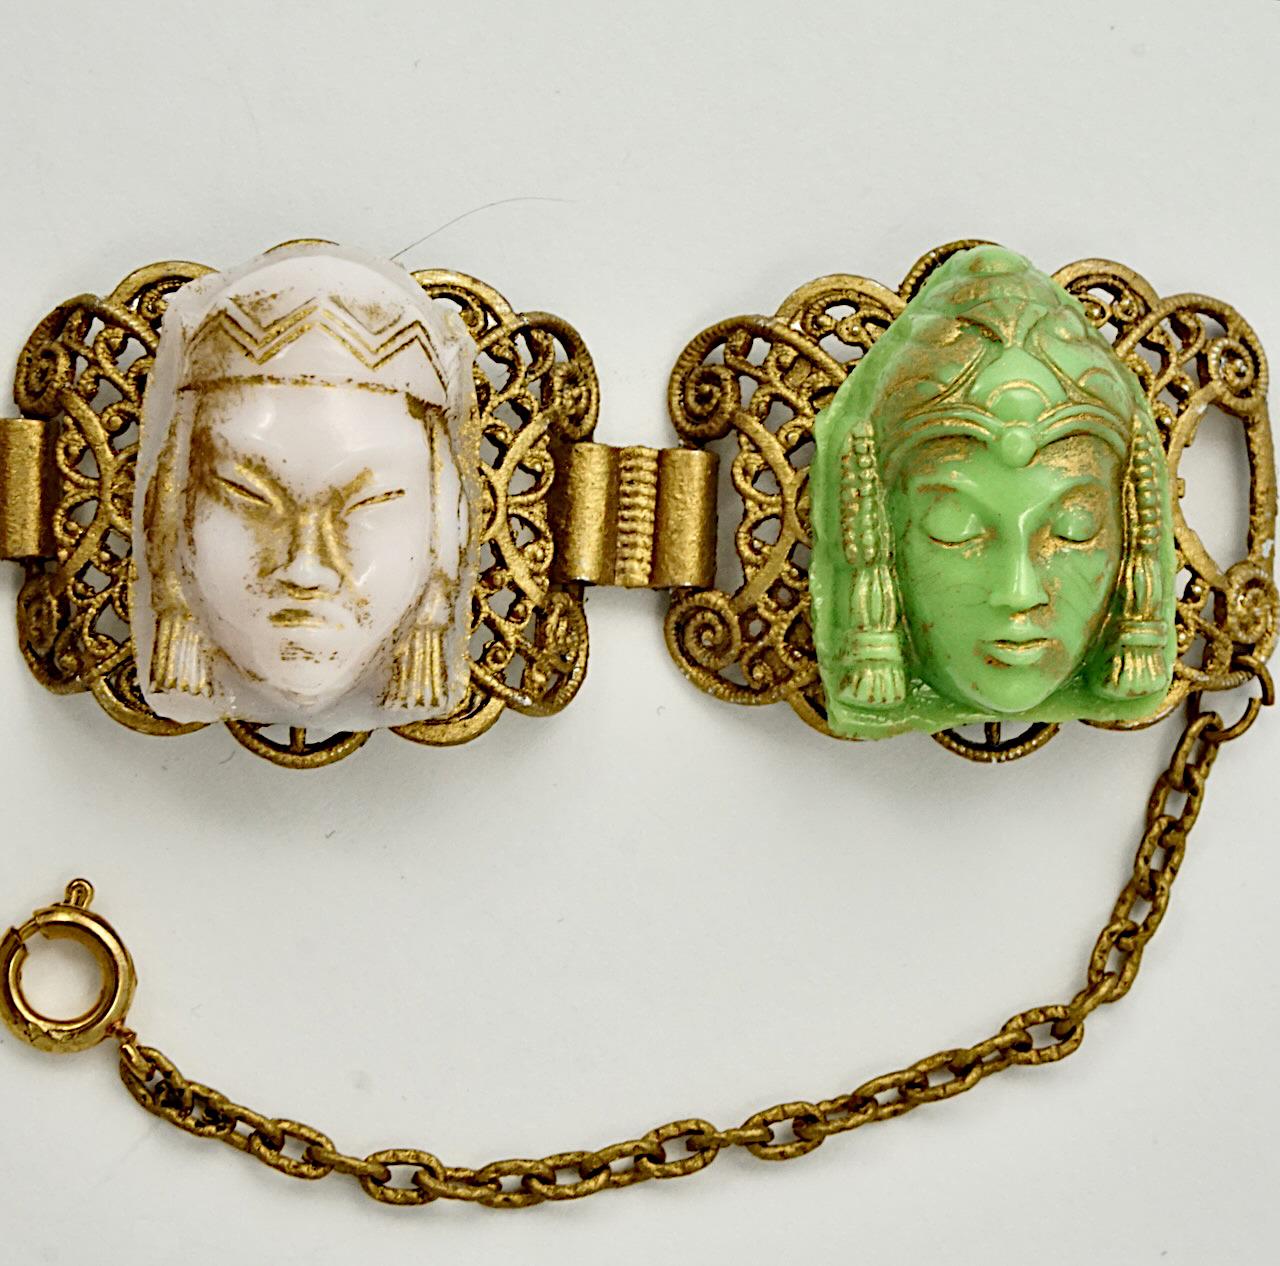 Gilt metal ornate coloured glass faces bracelet, with a safety chain. The bracelet measures length 20.5 cm / 8 inches by width 2.4 cm / .9 inch, it is light to wear. There is wear to the gilt. 

This is an unusual and beautiful coloured faces